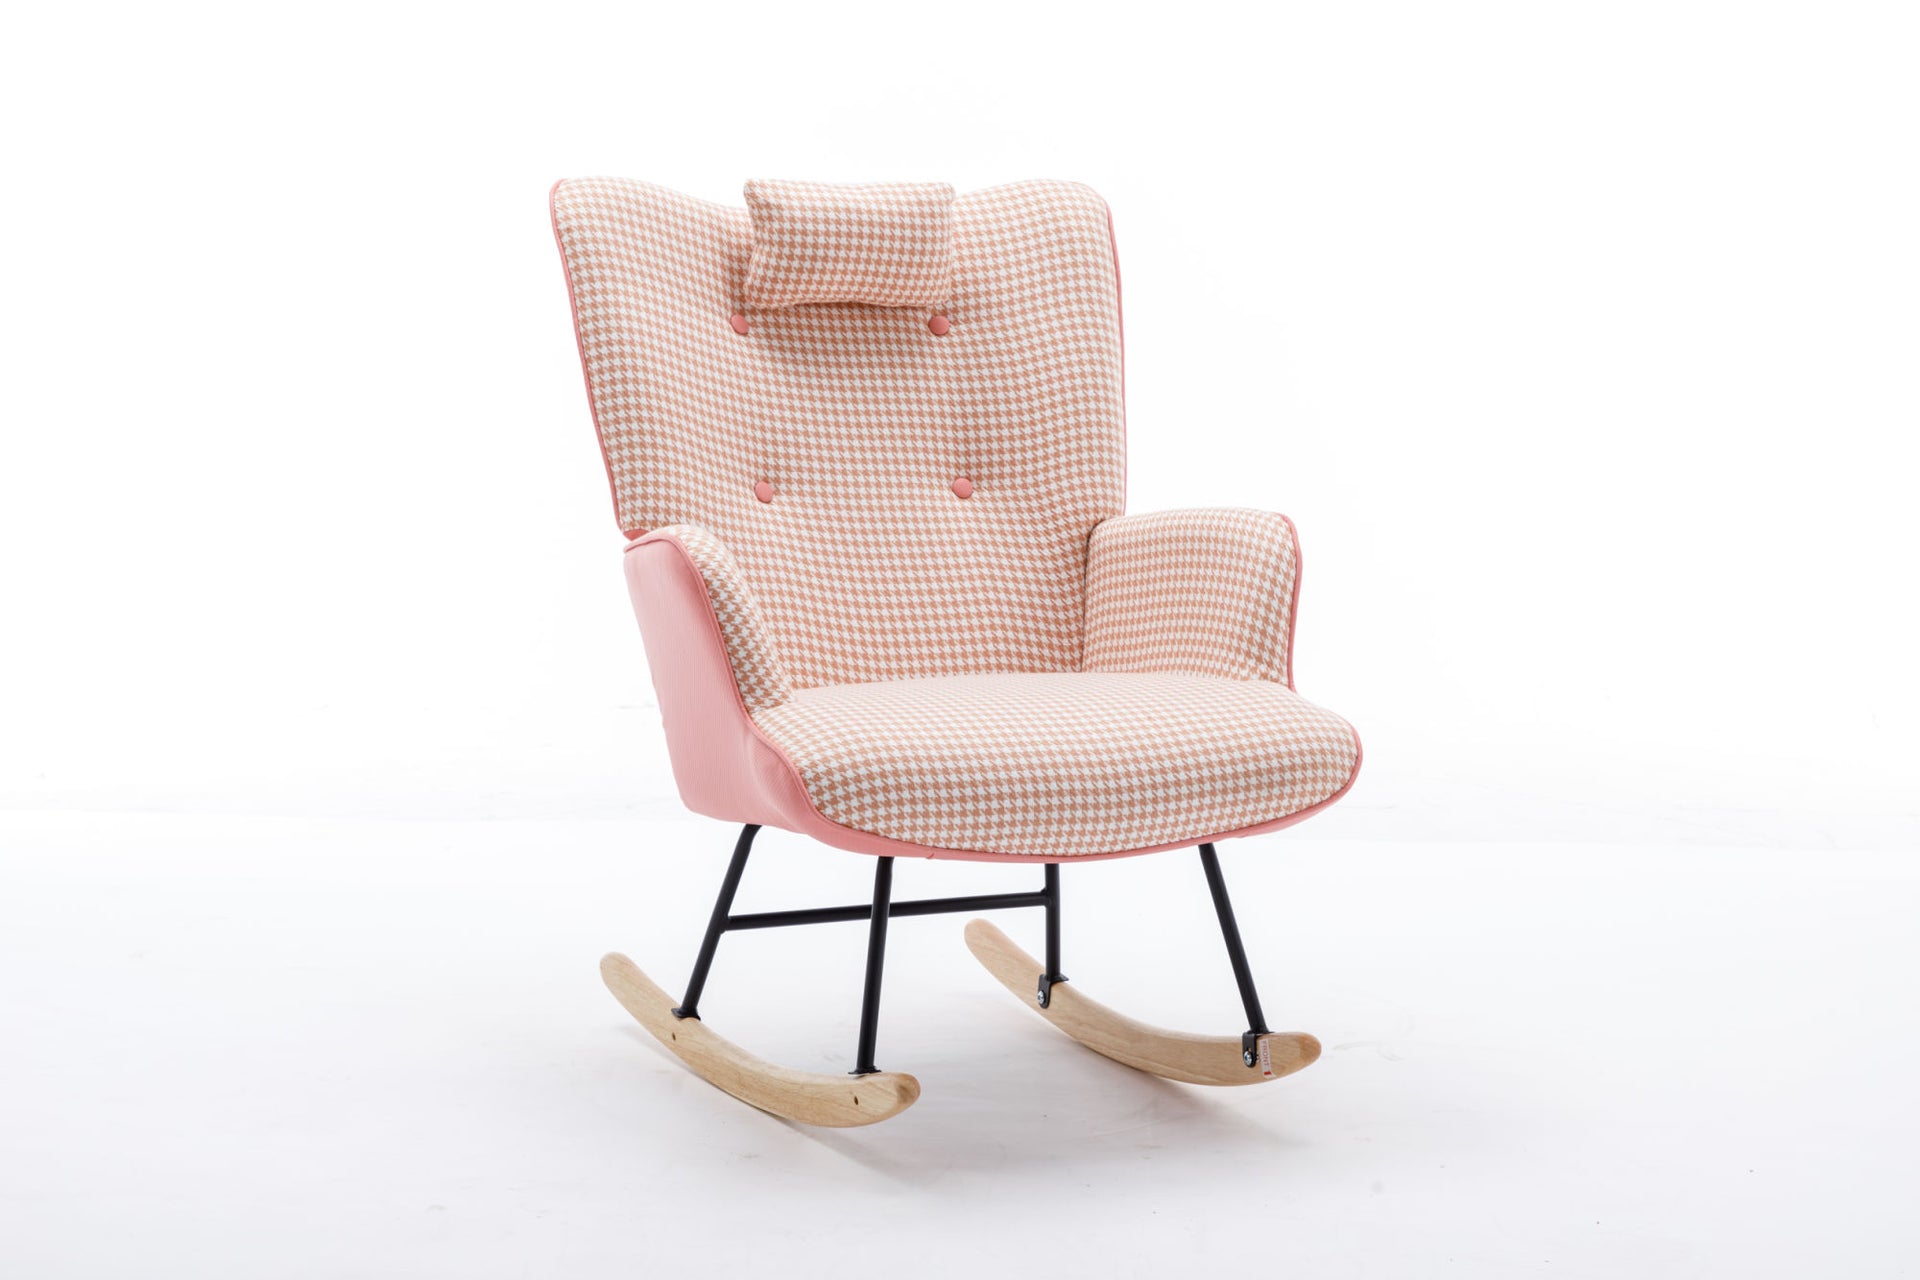 35.5 inch Rocking Chair, Soft Houndstooth Fabric Leather Fabric Rocking Chair for Nursery, Comfy Wingback Glider Rocker with Safe Solid Wood Base for Living Room Bedroom Balcony